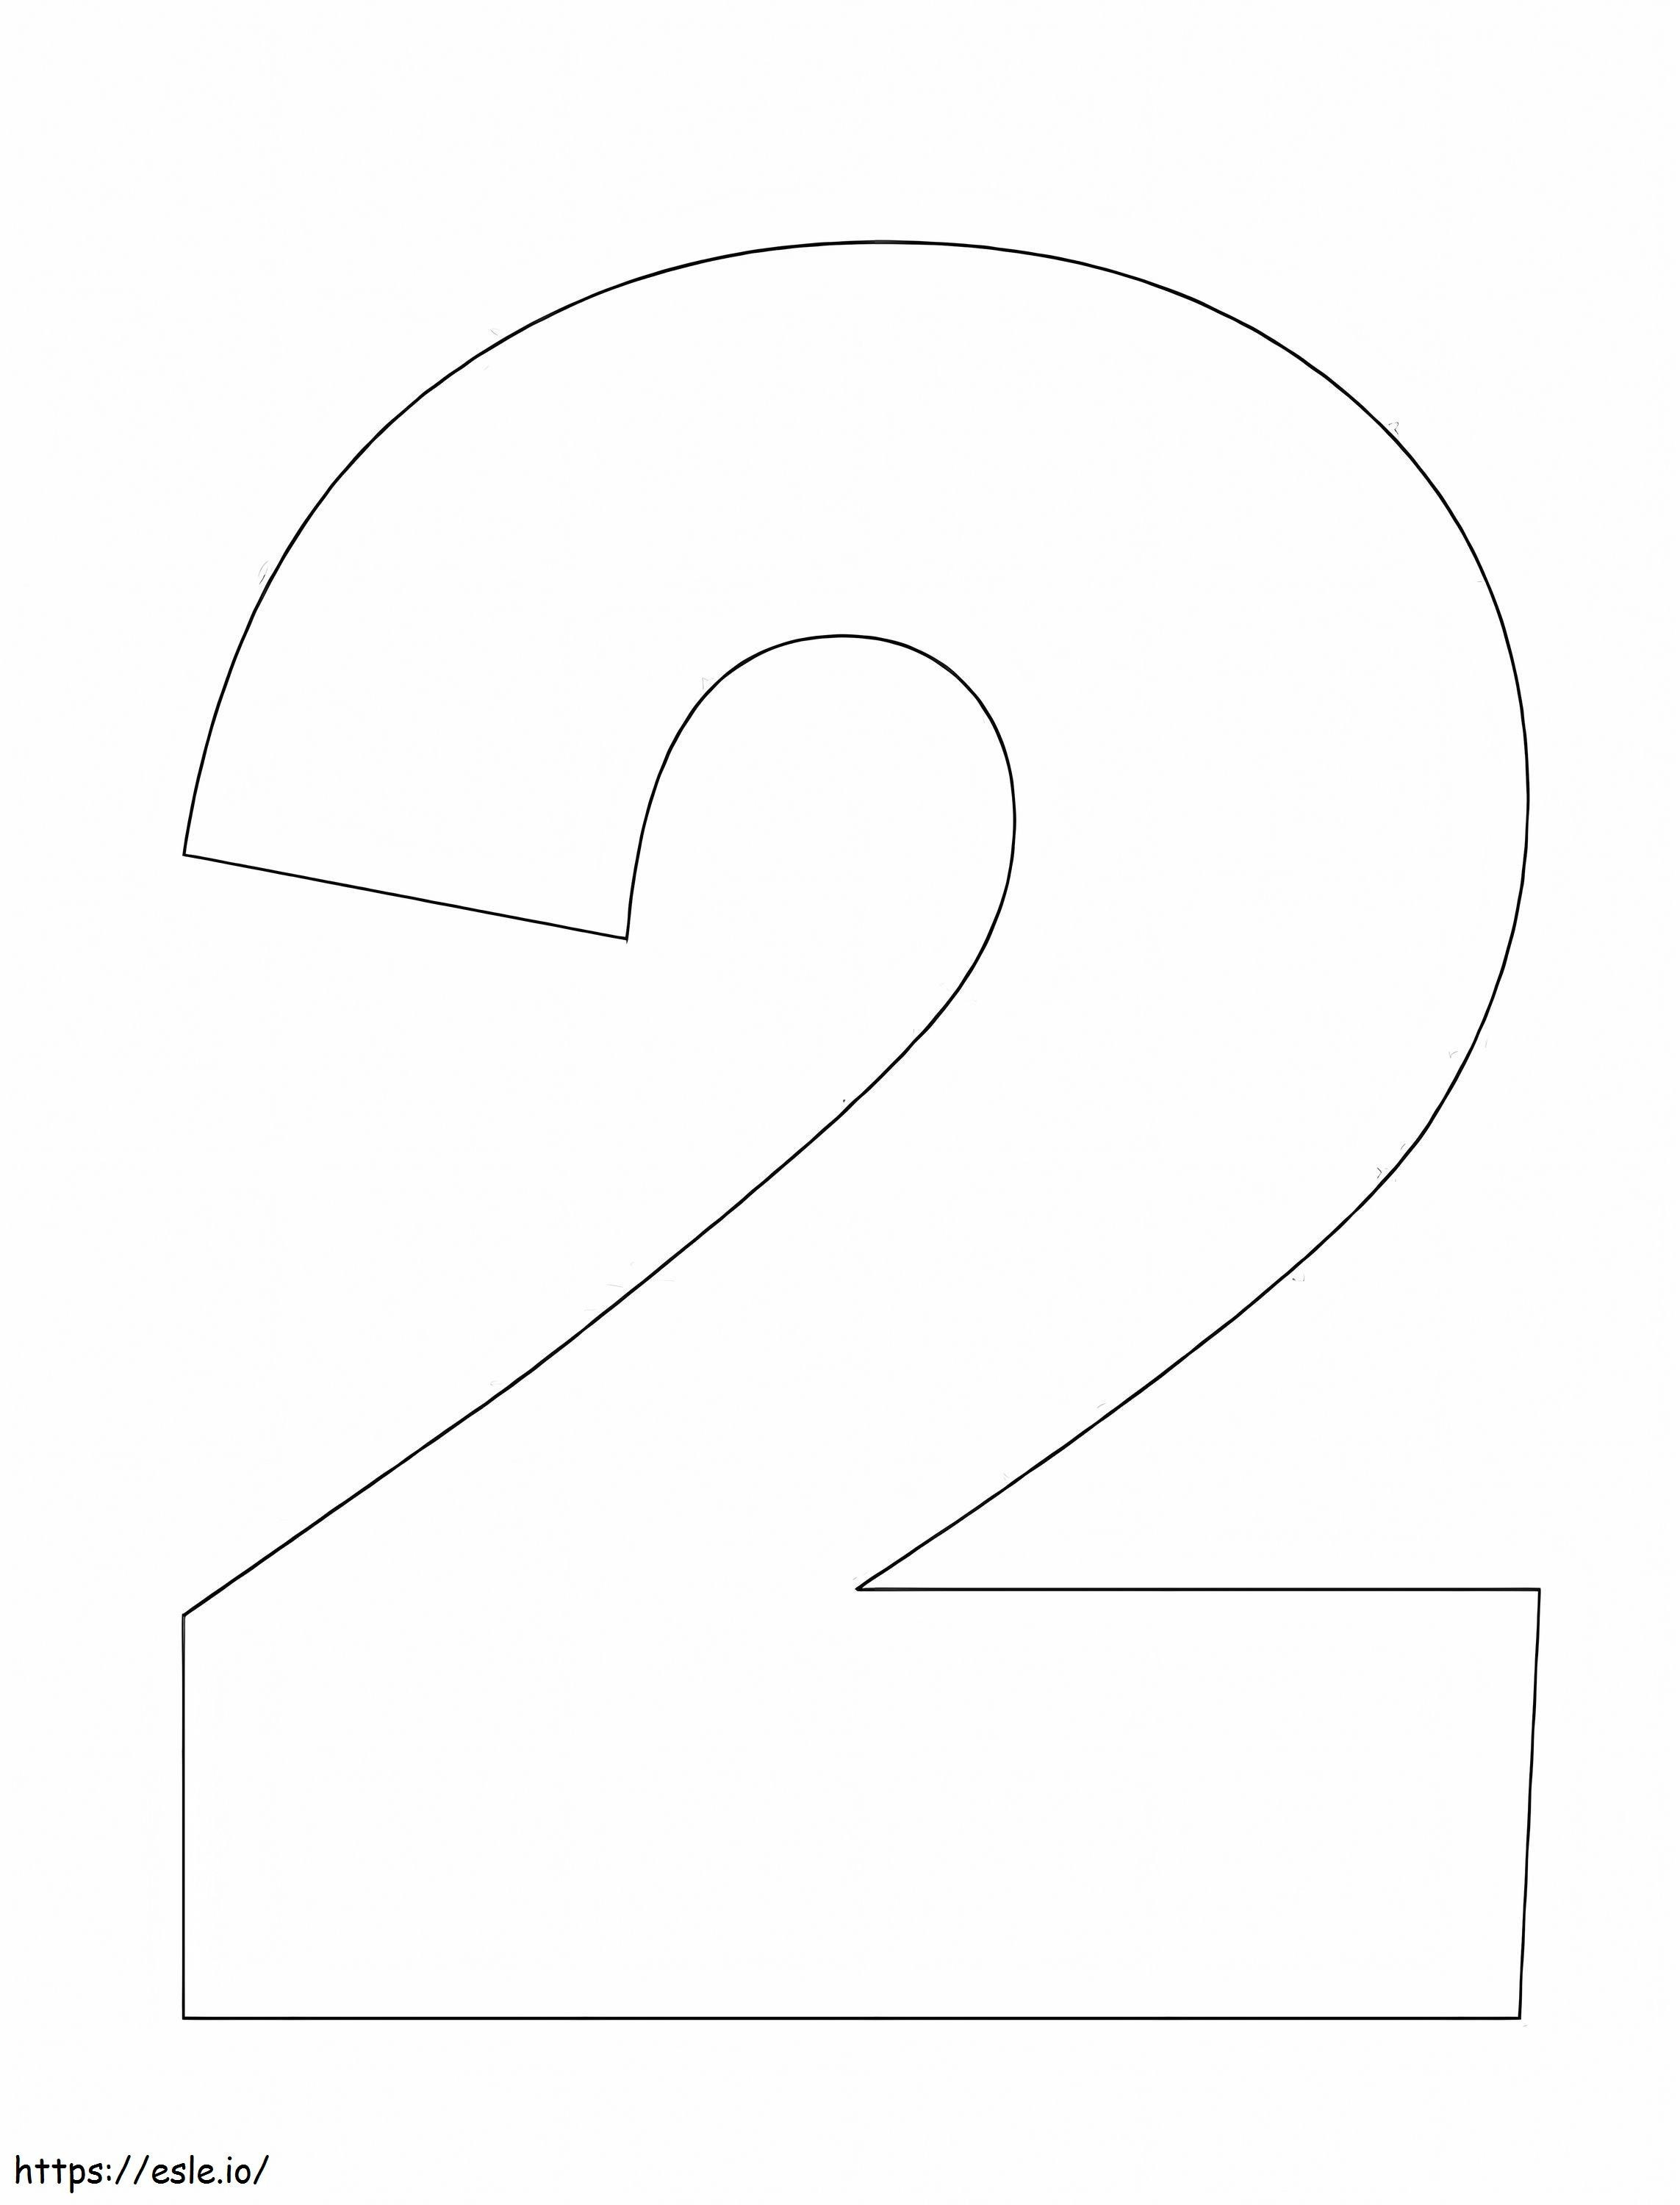 Big Number 2 coloring page